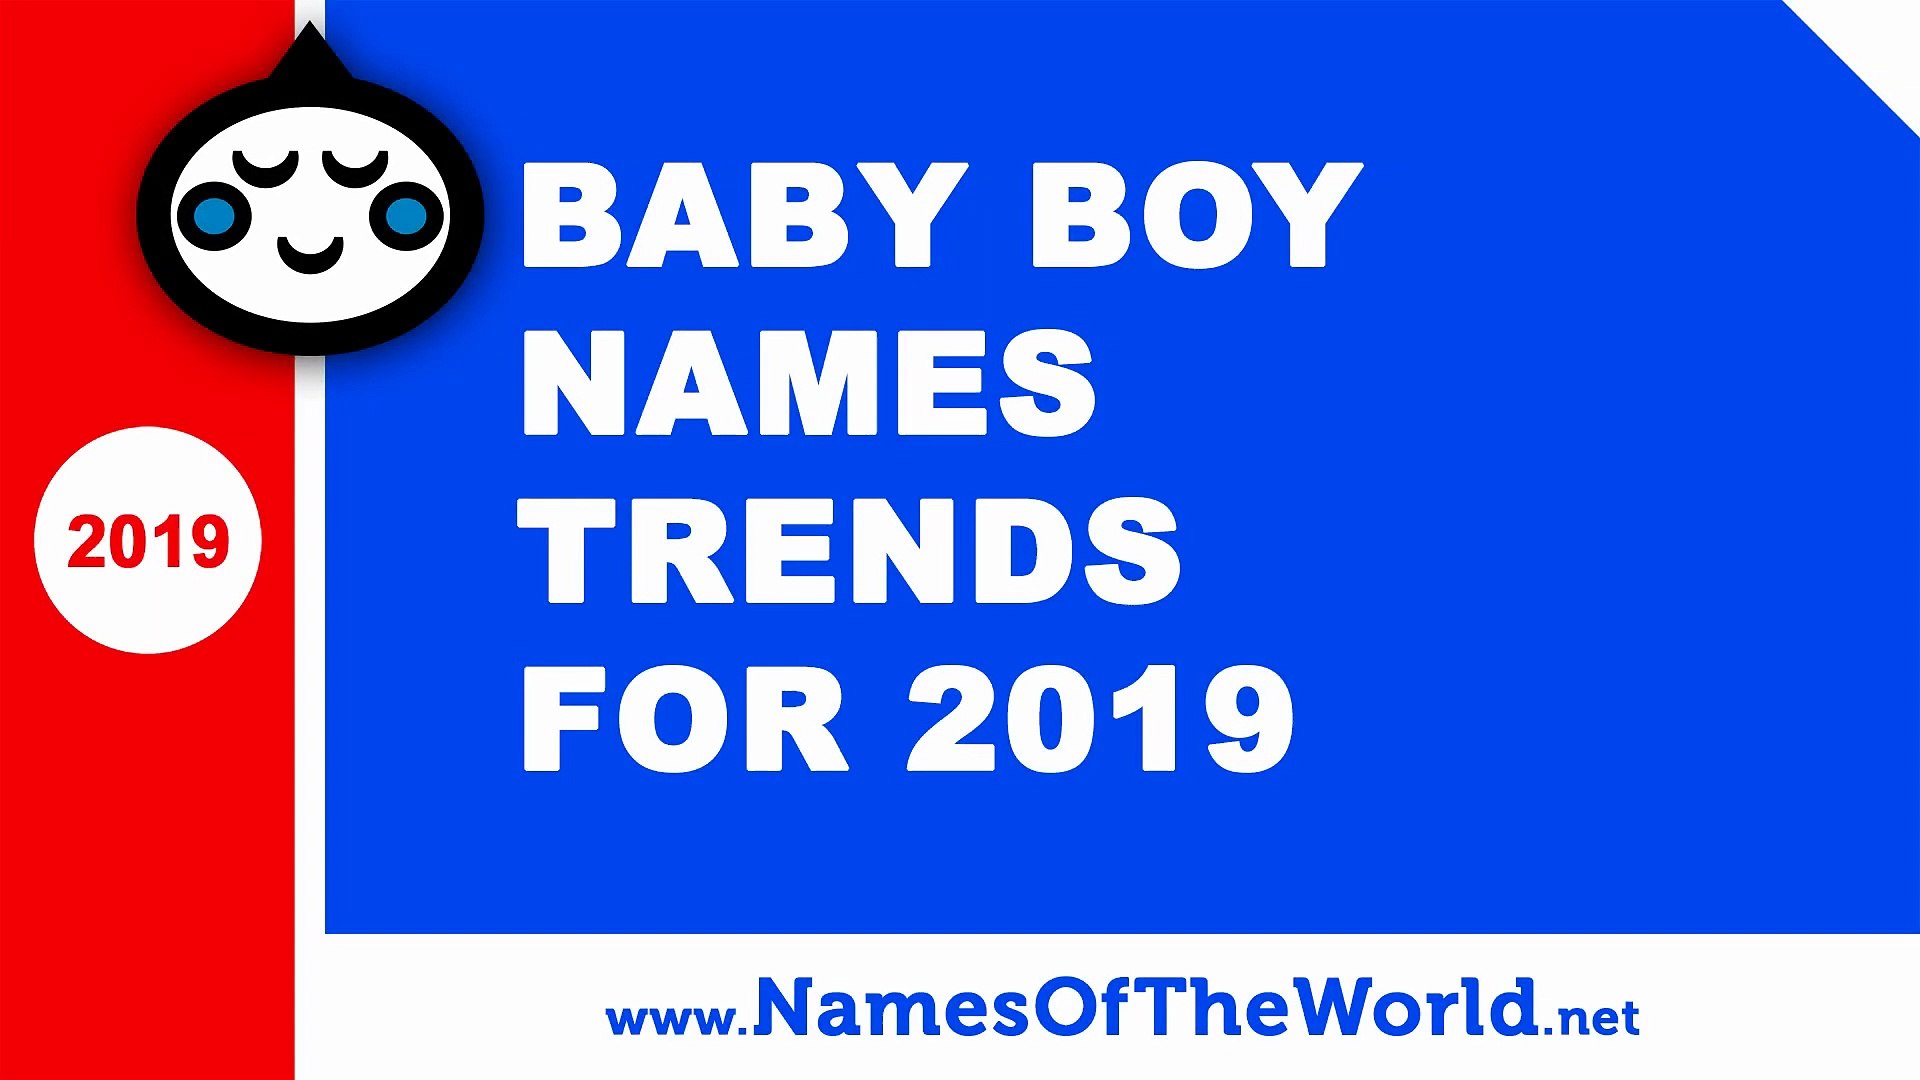 Baby Boy Names Trends For 2019 The Best Baby Names Www - 2019 cool baby boy names